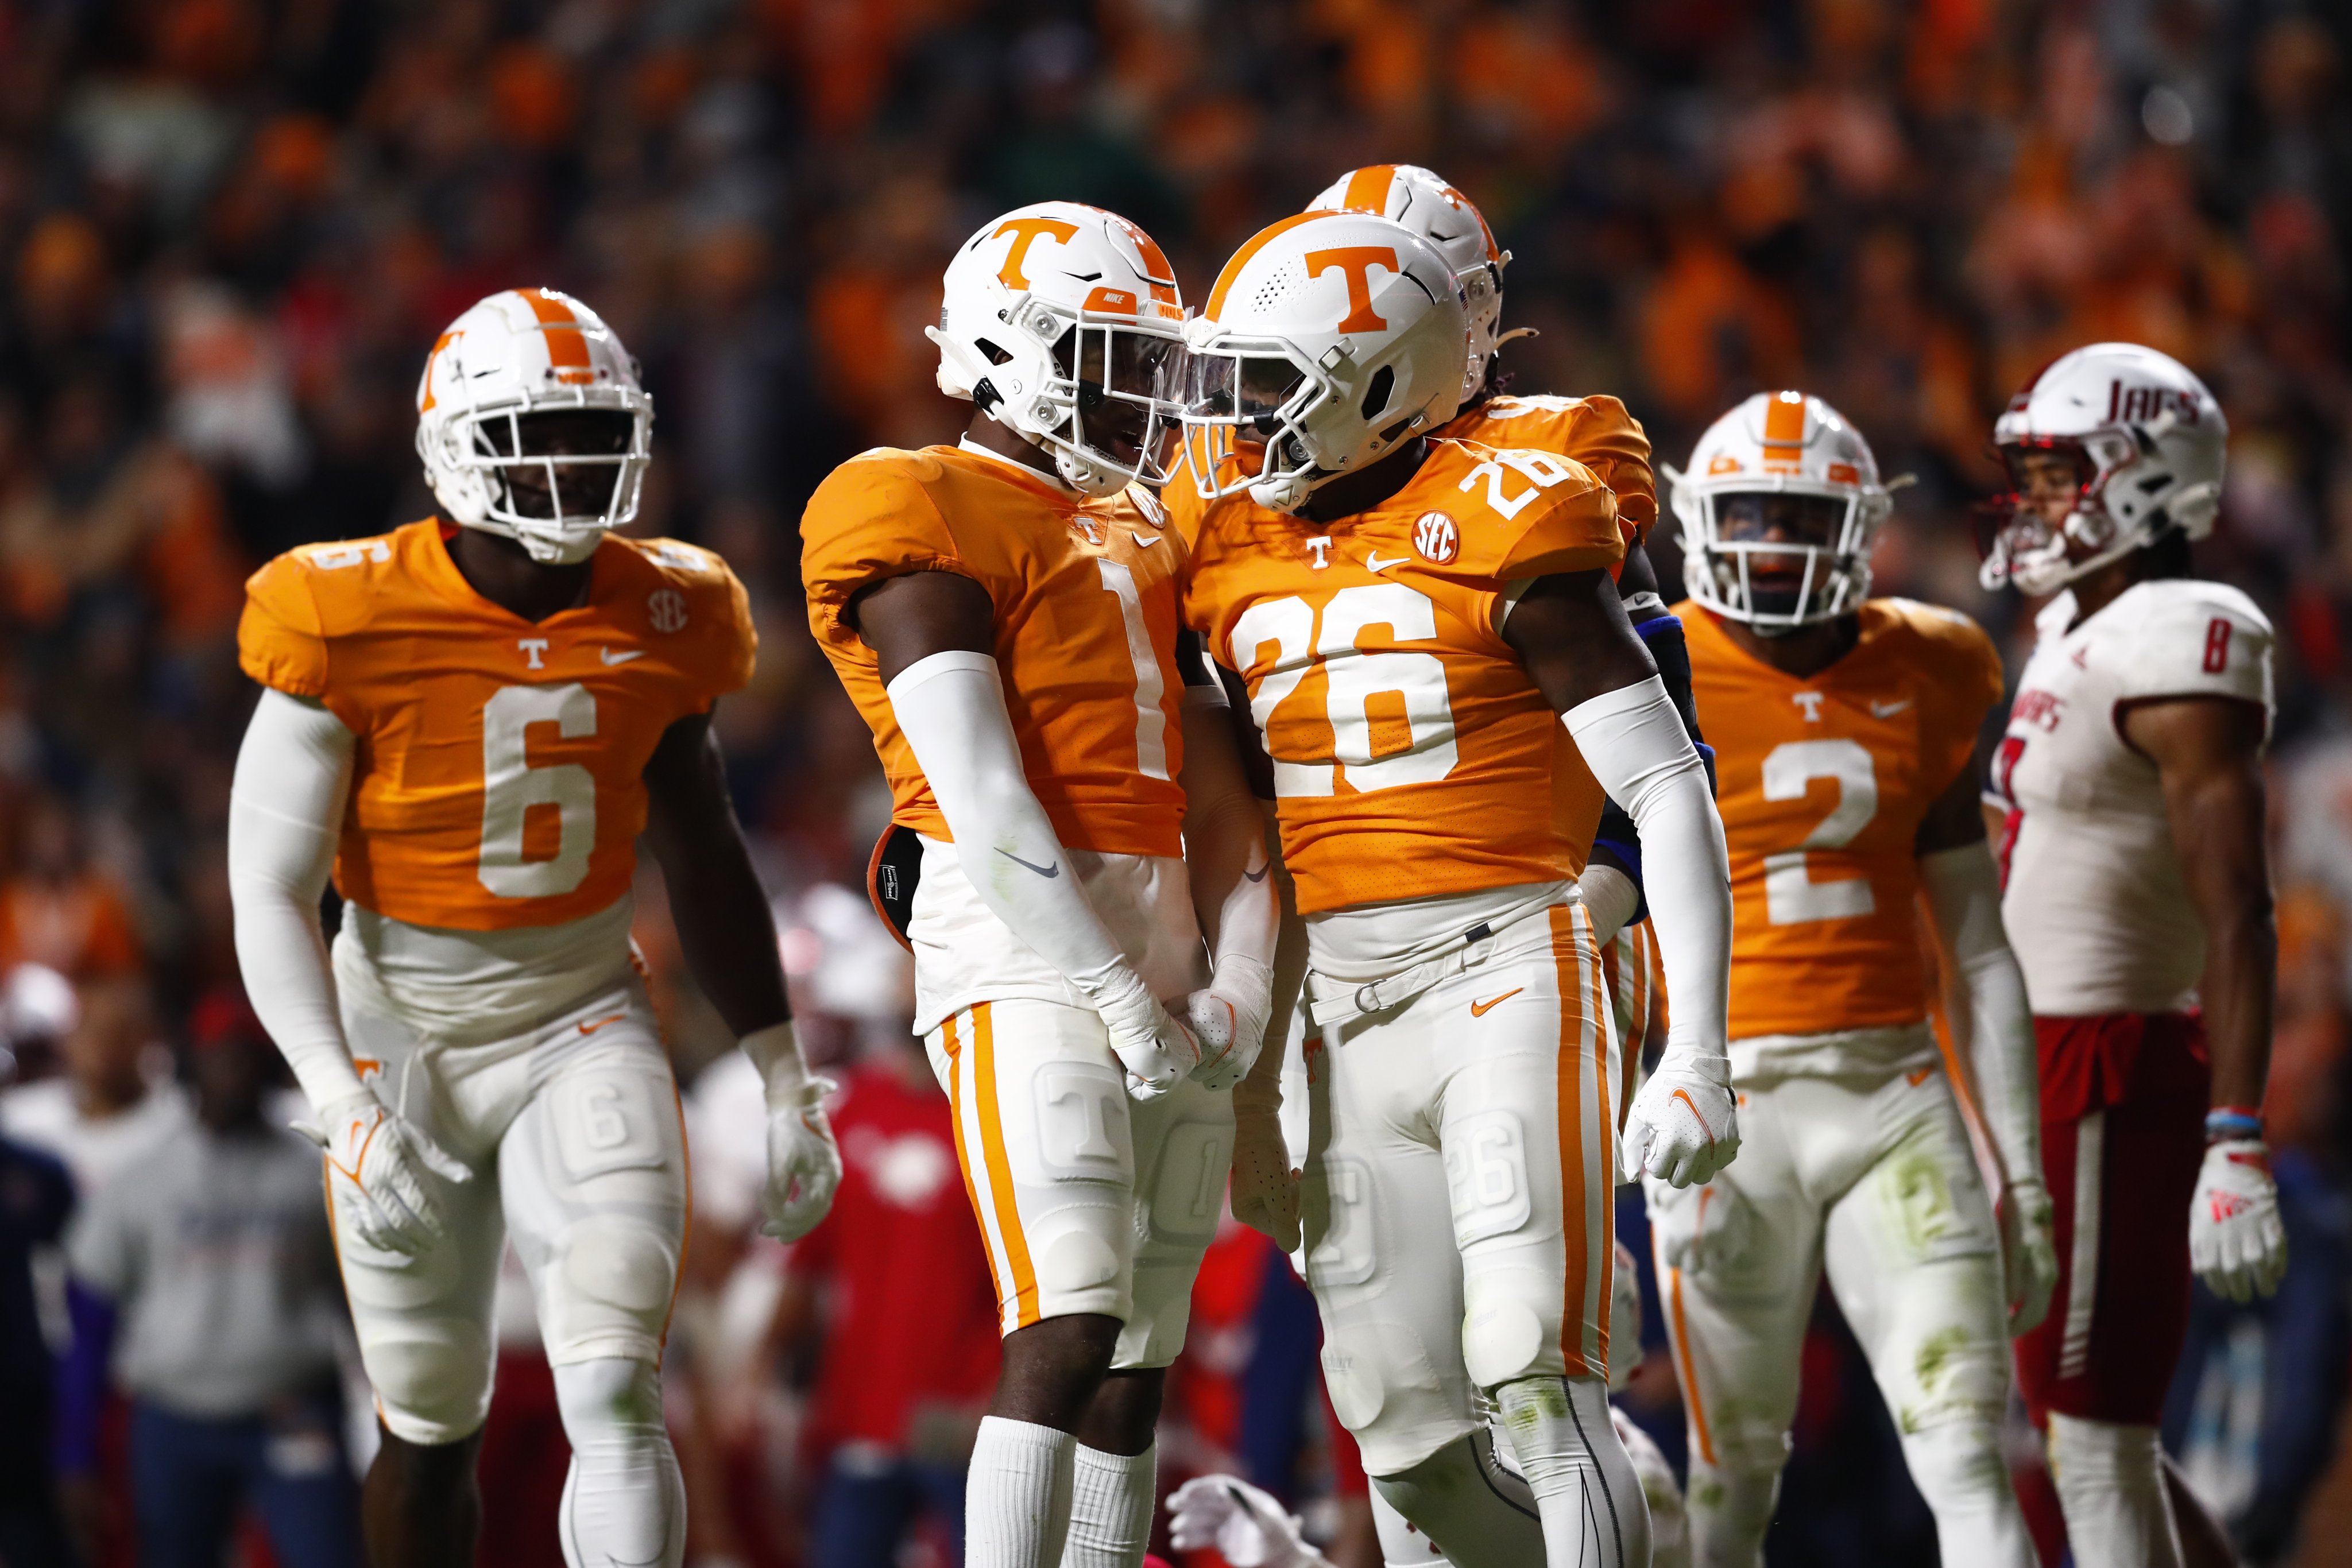 Official Tennessee football uniforms thread - Page 5 - VolNation  Tennessee  football, Football uniforms, Tennessee volunteers football